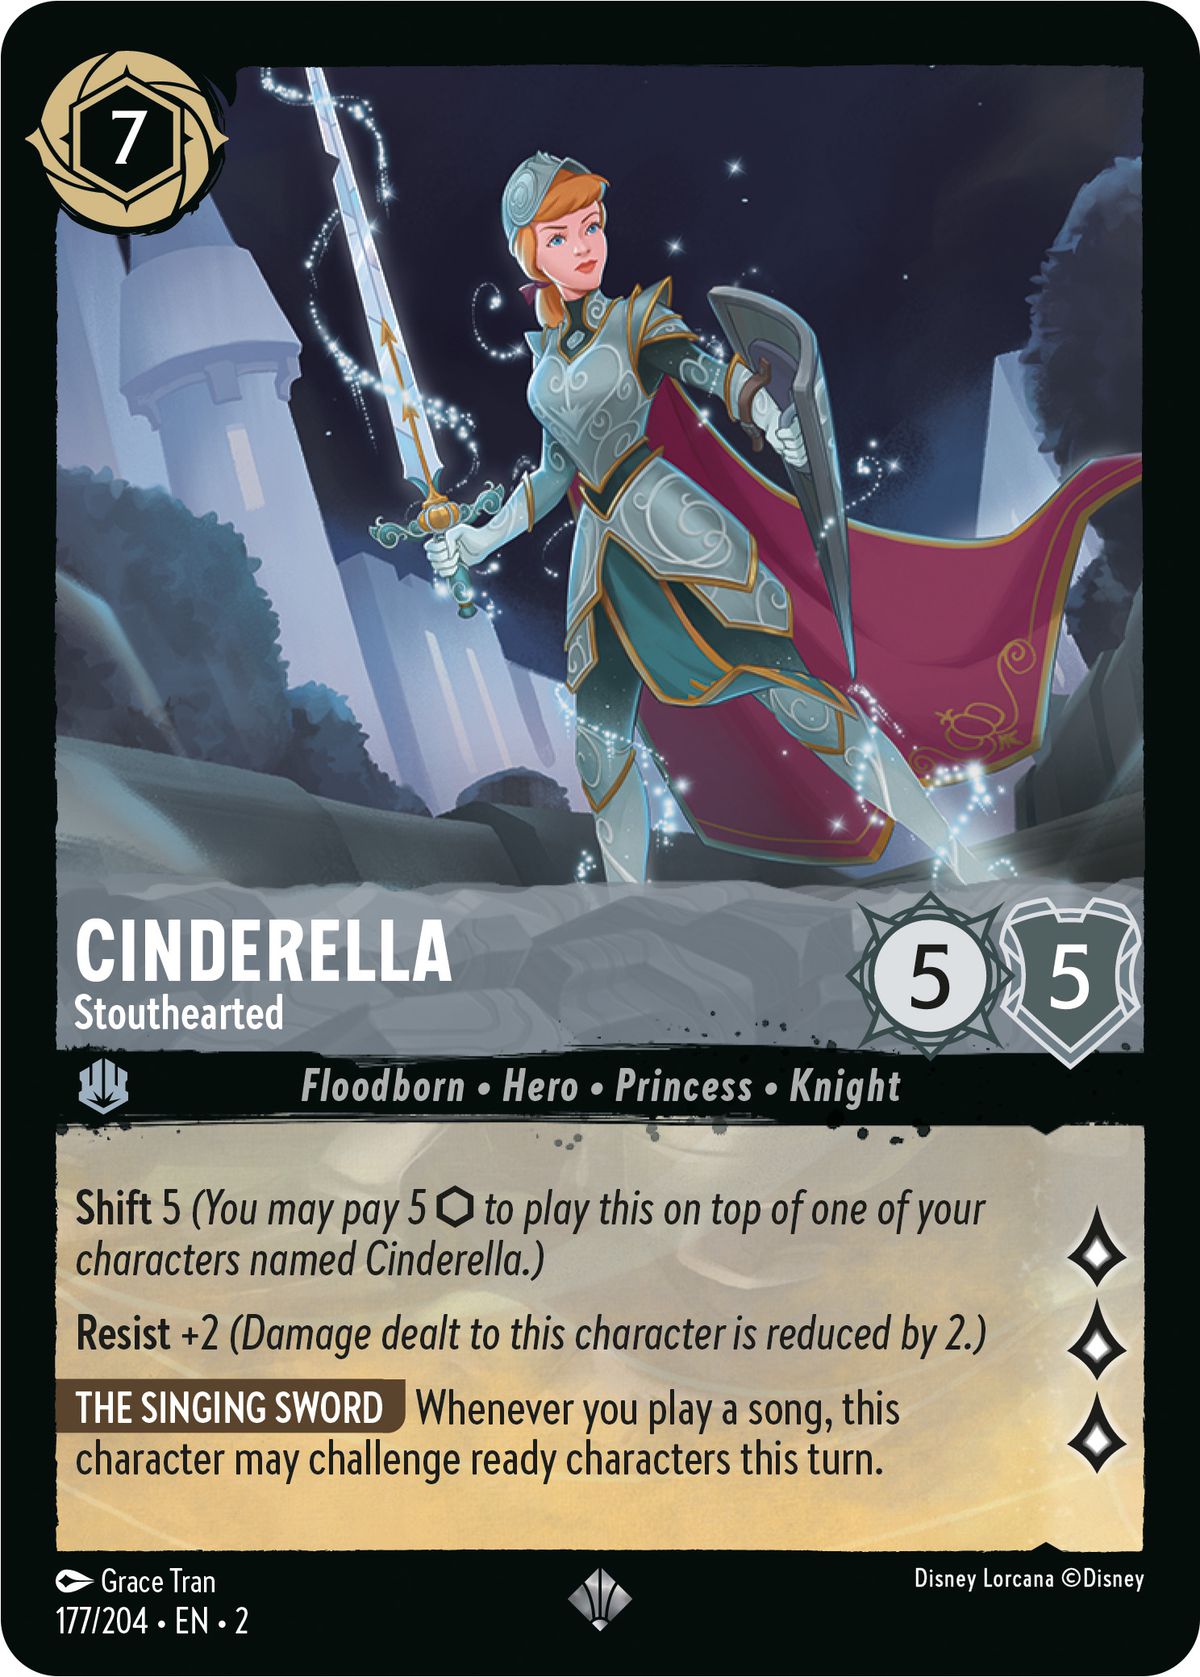 Cinderella, Stouthearted is a 5/5/ hero, princess, knight with shift 5 and resist 2. It’s steel-colored.